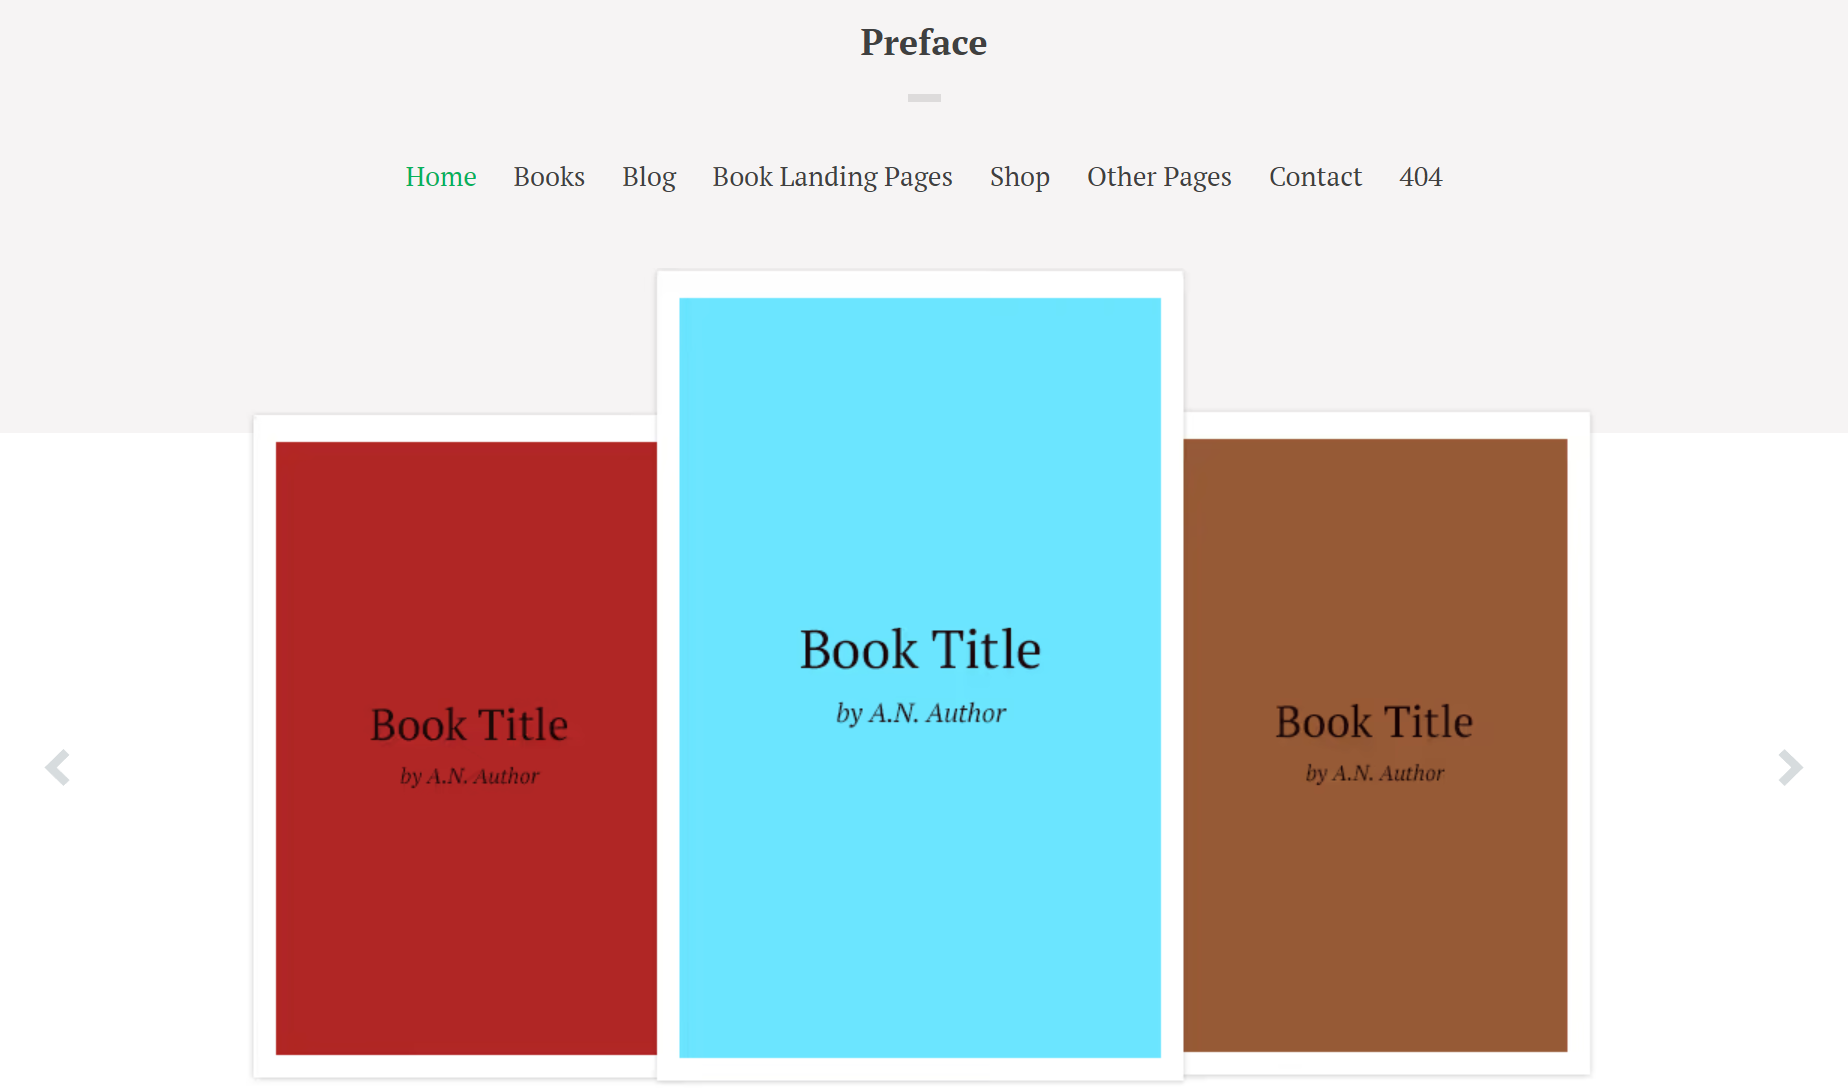 Preface - Best WordPress Themes for Writers and Authors